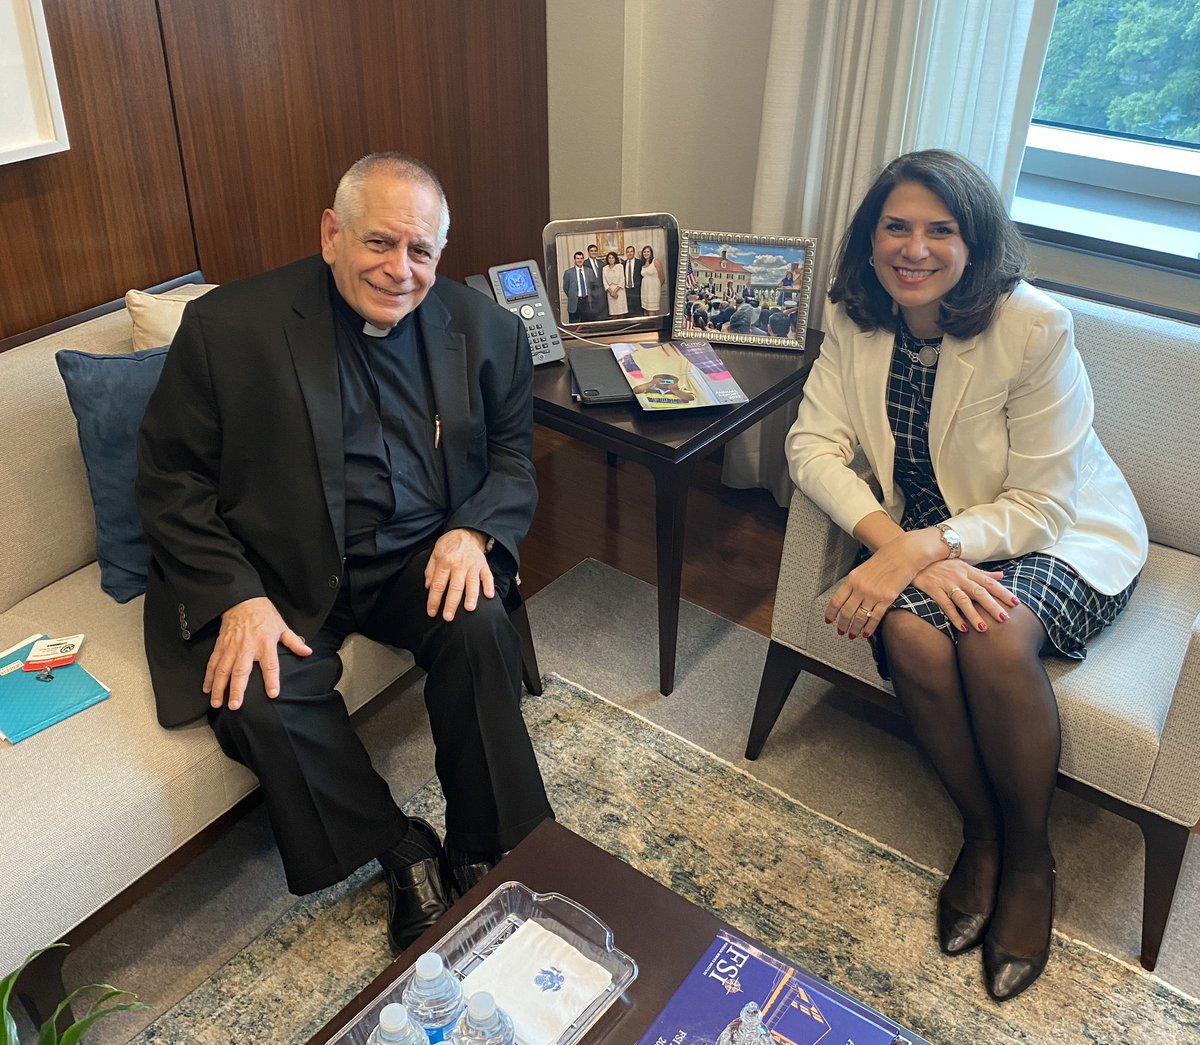 @PRMAsstSec: Wonderful to connect again with @bobvitillo from @ICMC_News. I’m proud of our ongoing efforts to scale up refugee resettlement from across the Middle East to the United States.